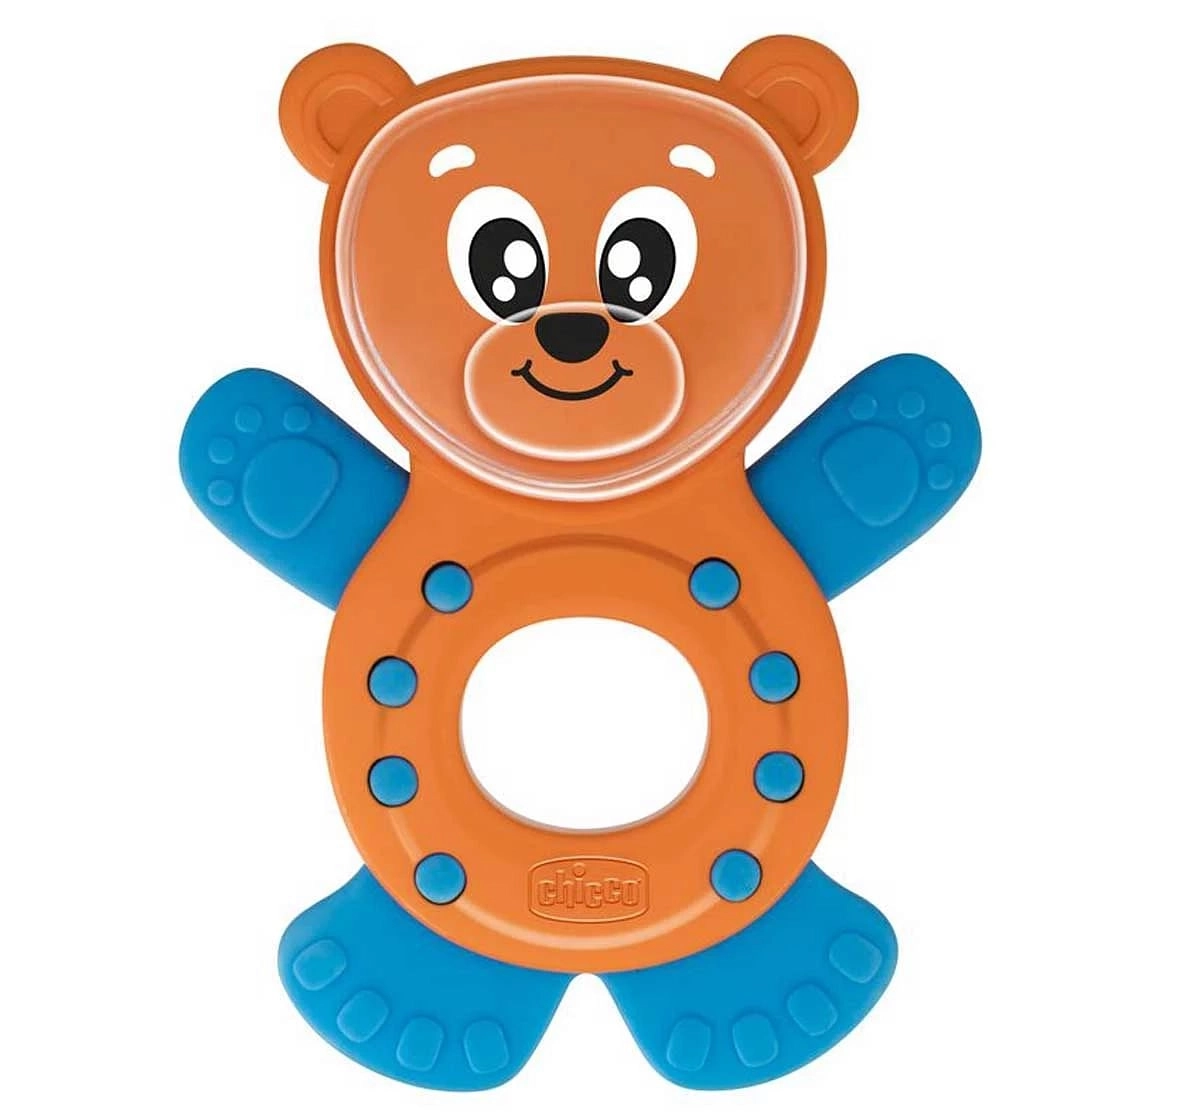 Chicco Ben the Bear Rattle for Kids 3M+, Multicolour